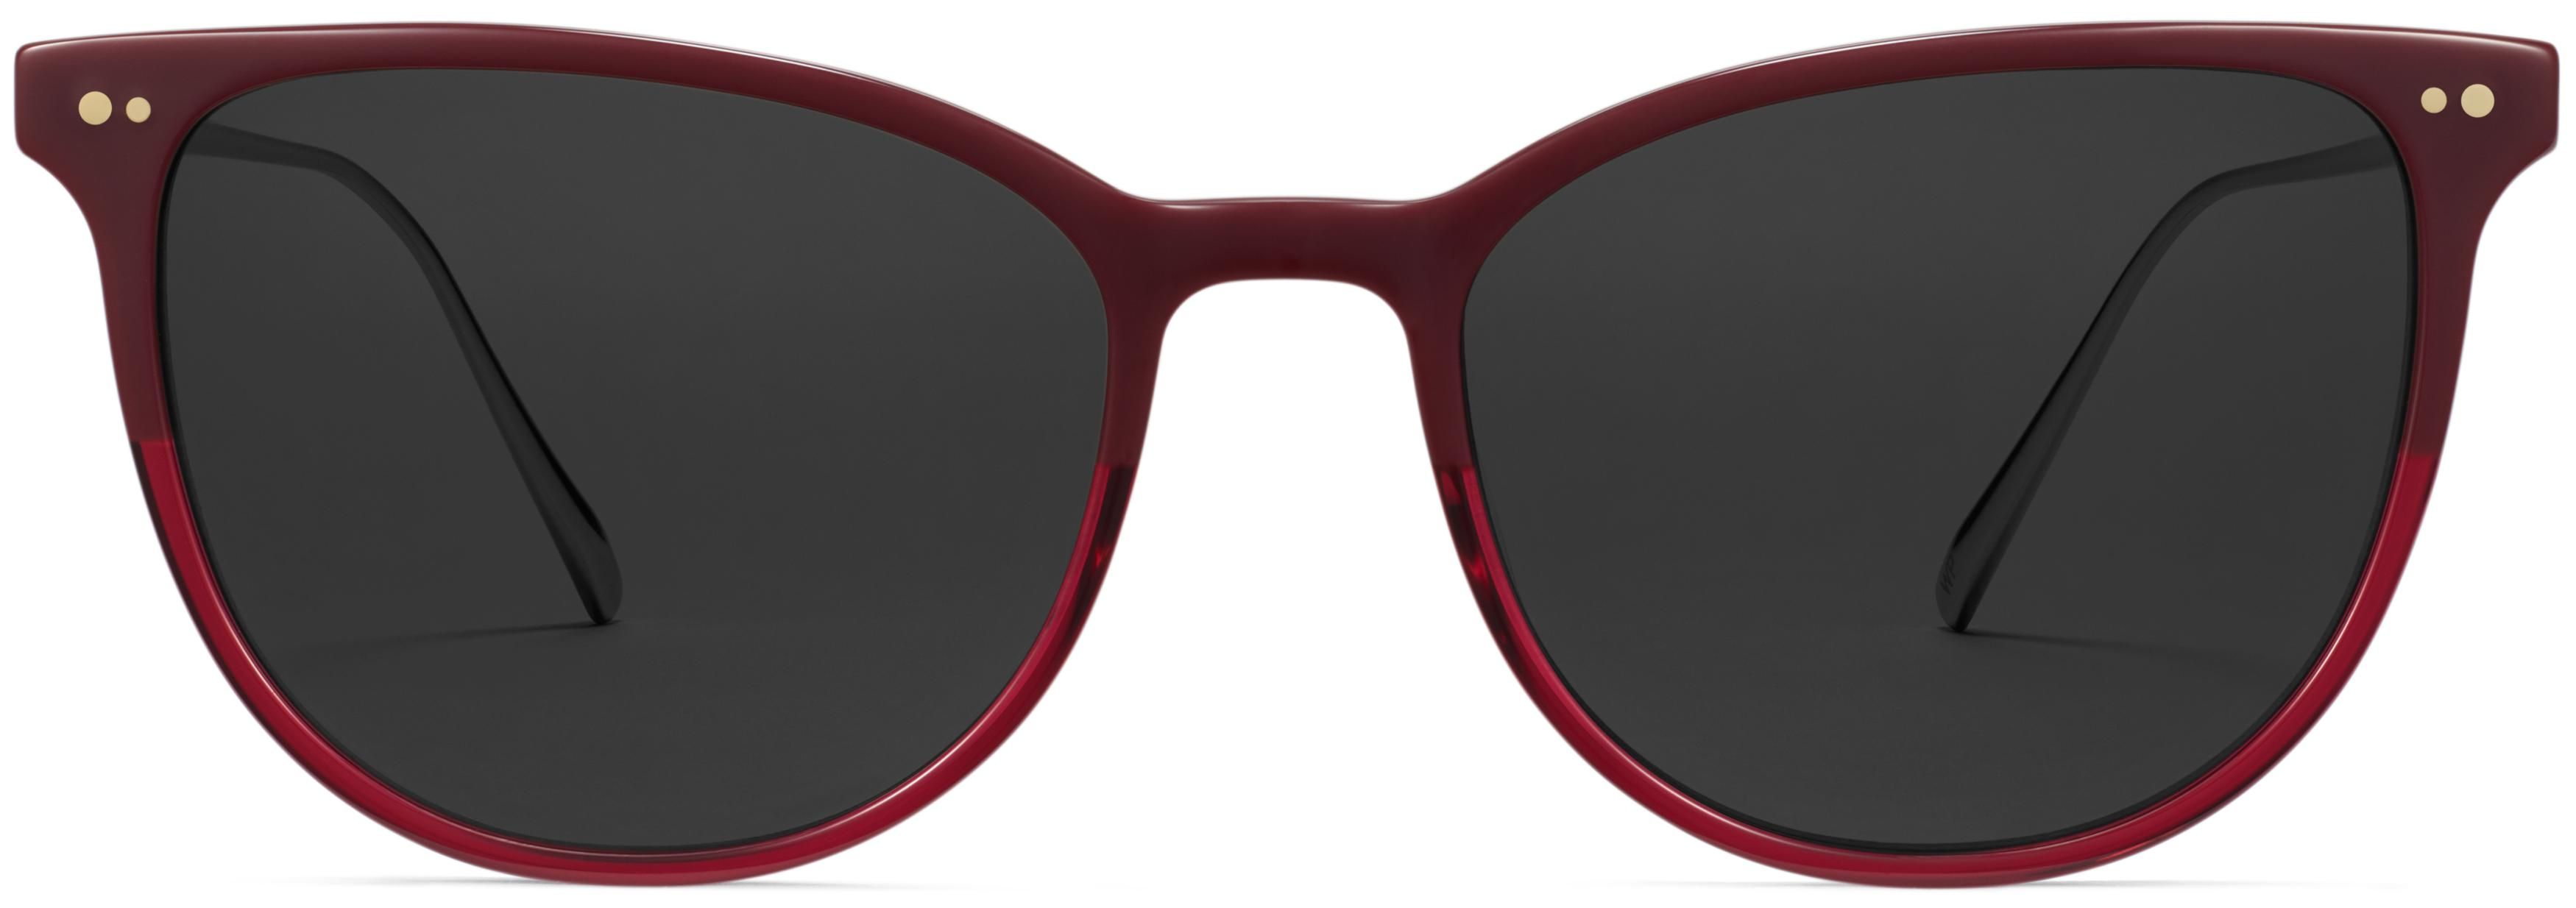 Maren Sunglasses in Oxblood Fade with Polished Gold | Warby Parker | Warby Parker (US)